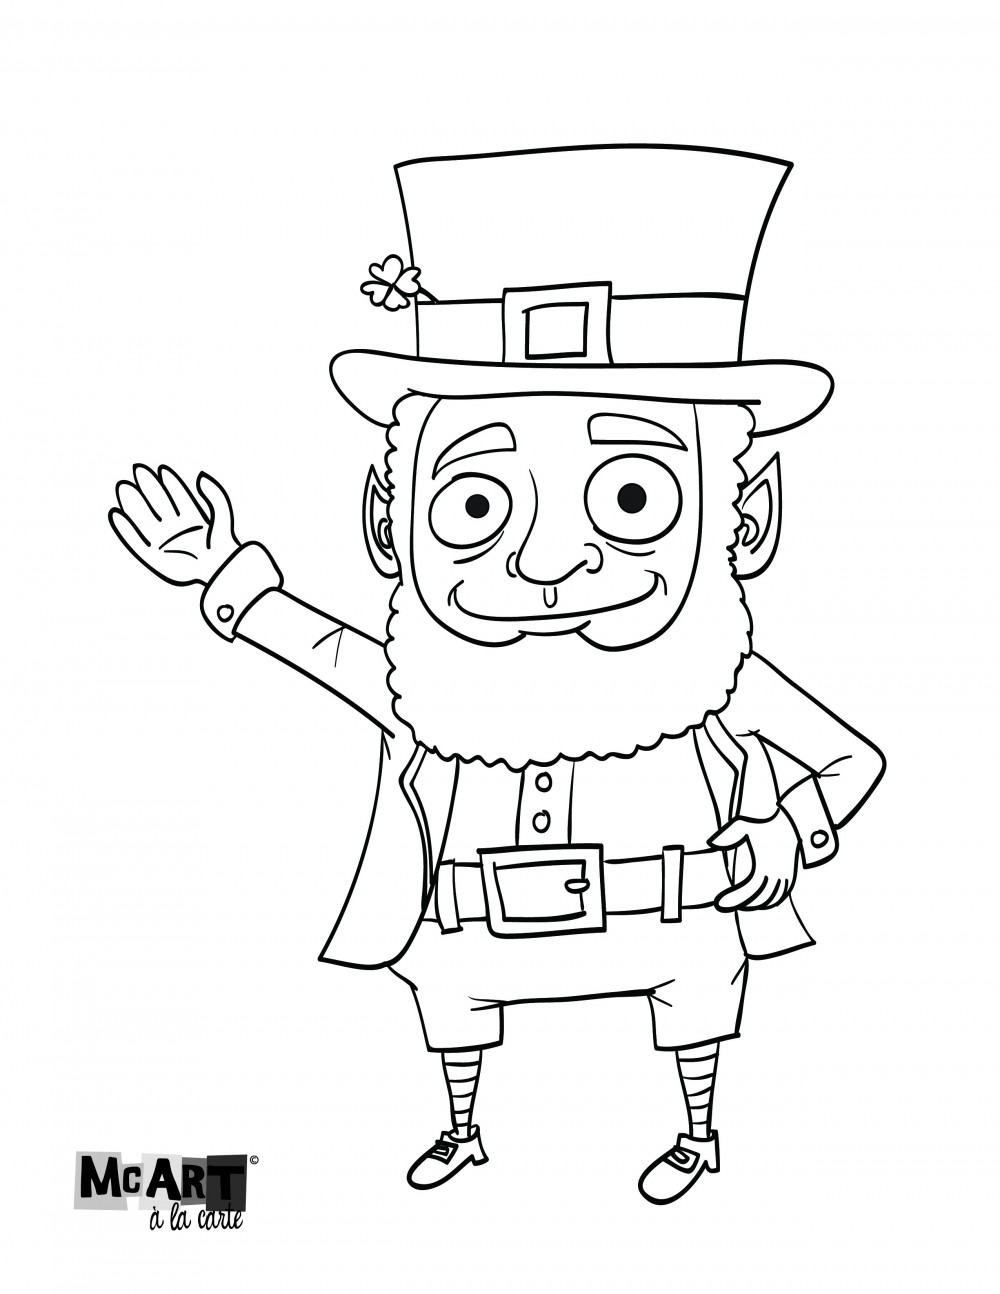 coloring pages - McIllustrator